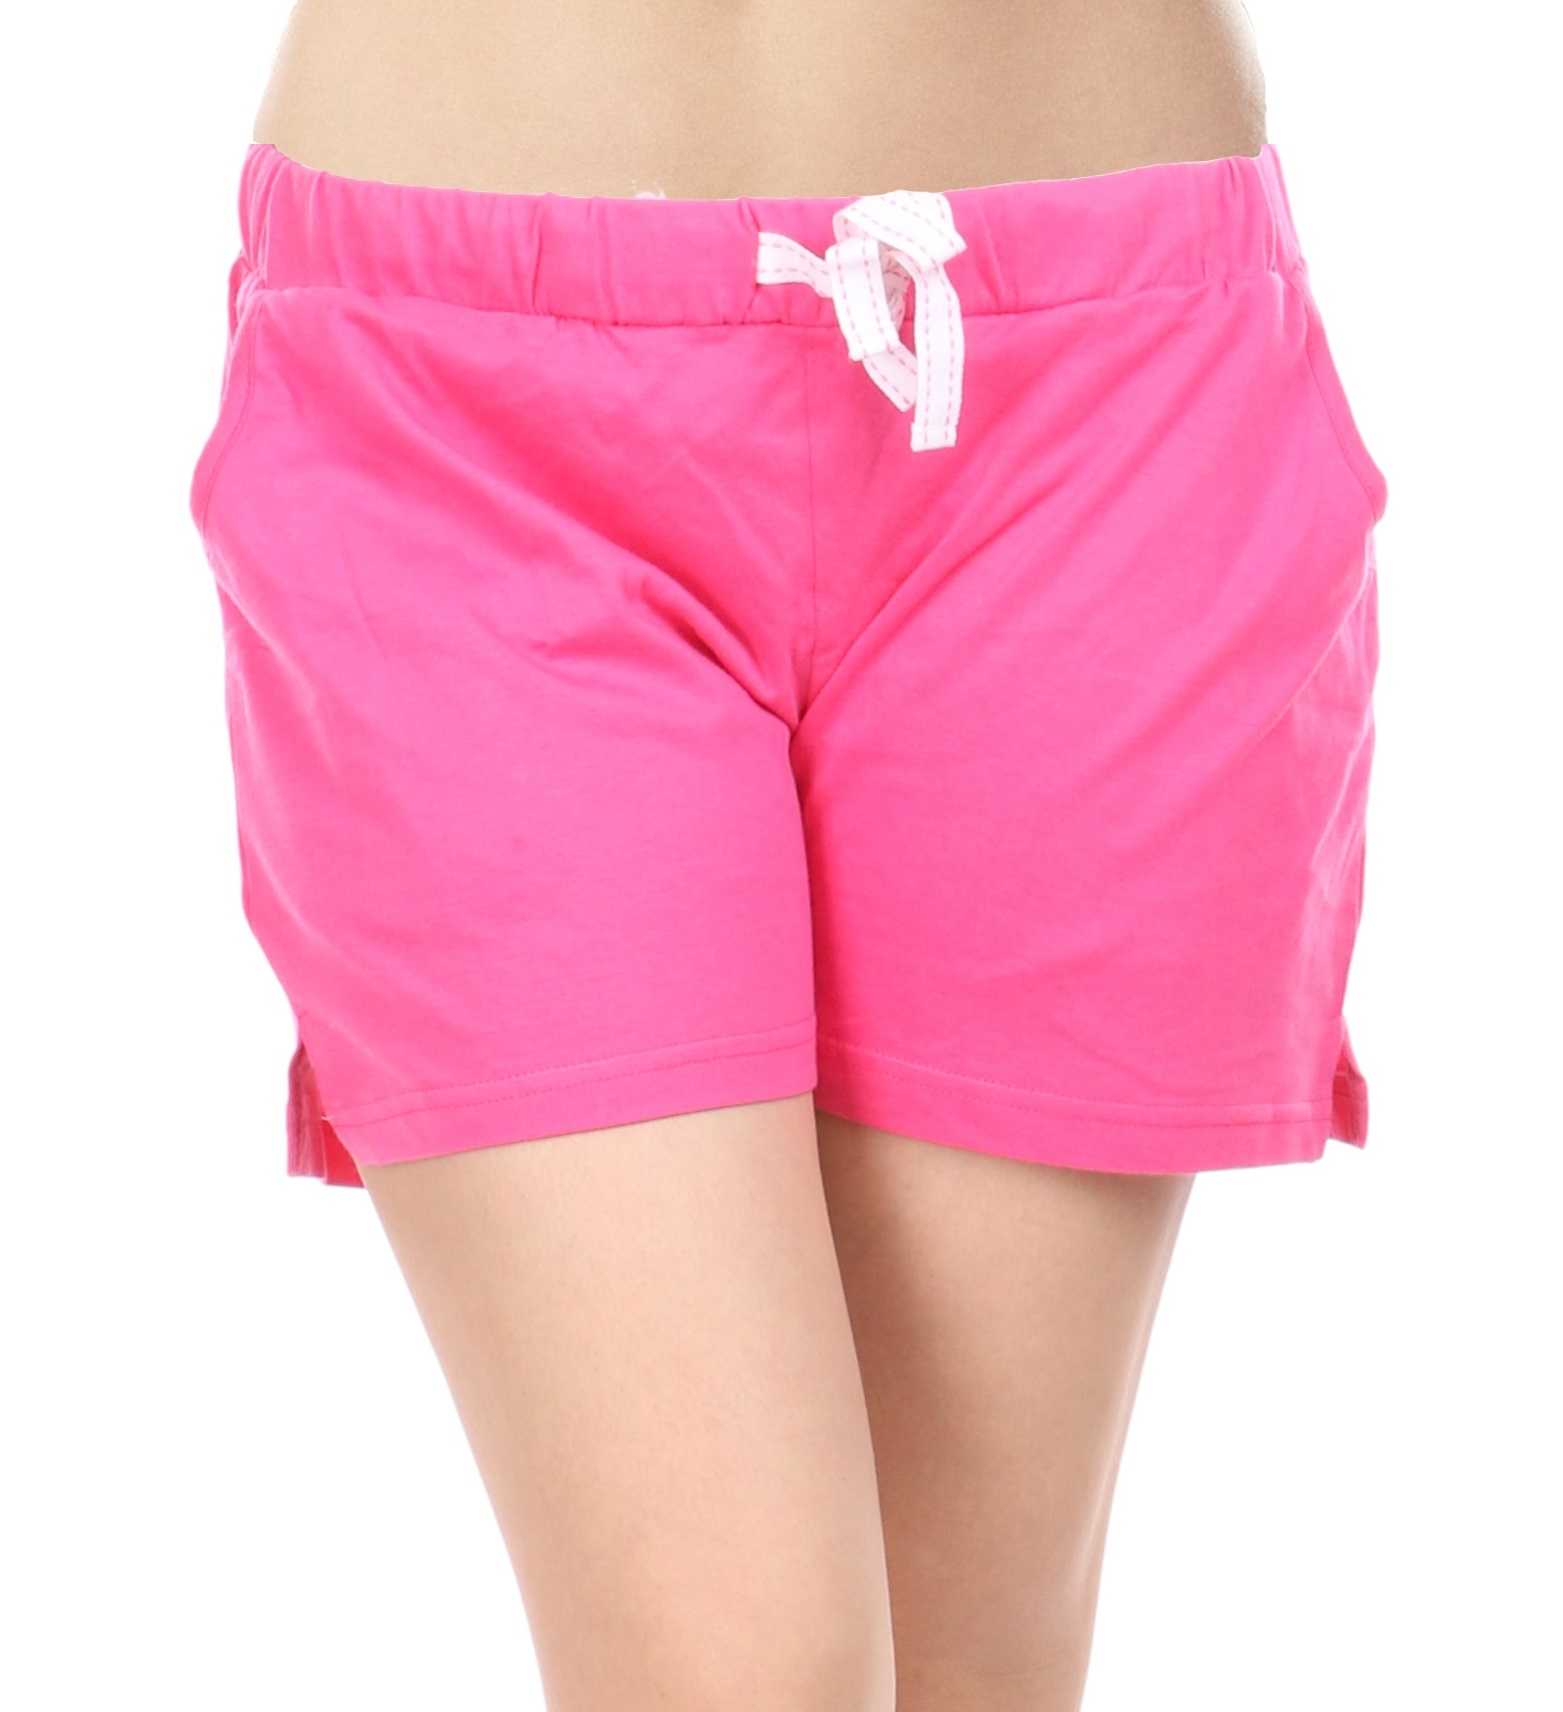 Buy Combo of 2 Women Cotton Night Shorts in Red & Pink Color - Set of 2 ...